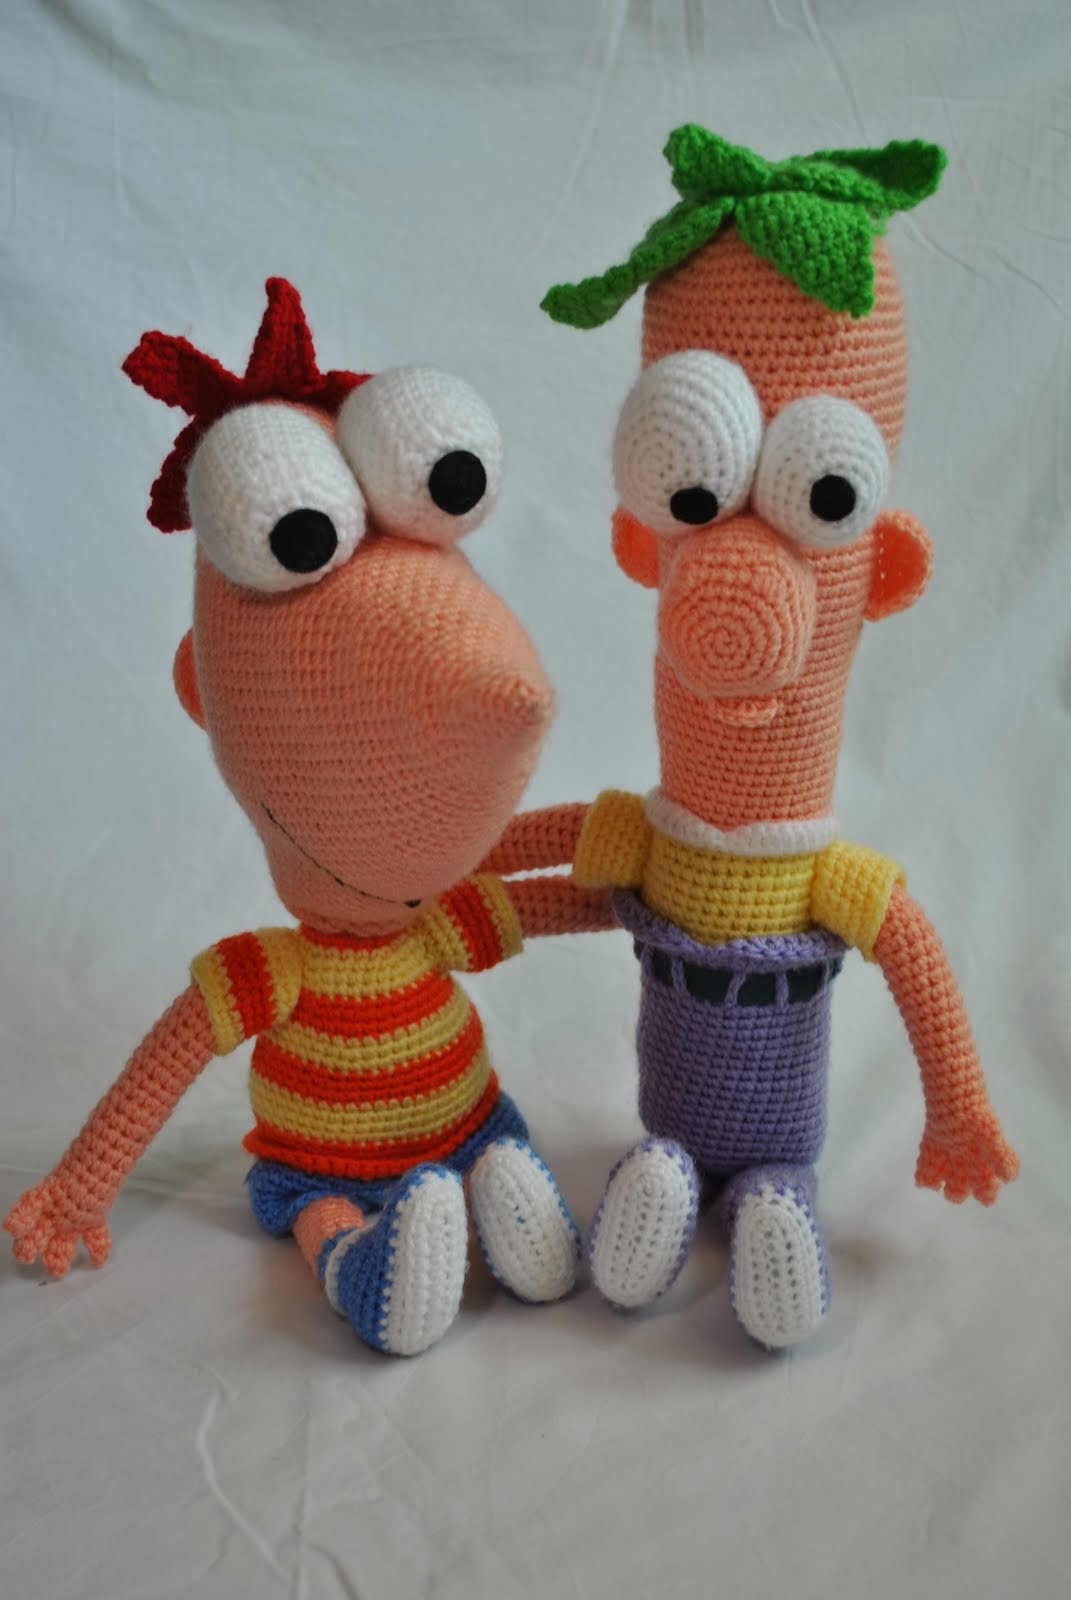 Phineas &Ferb